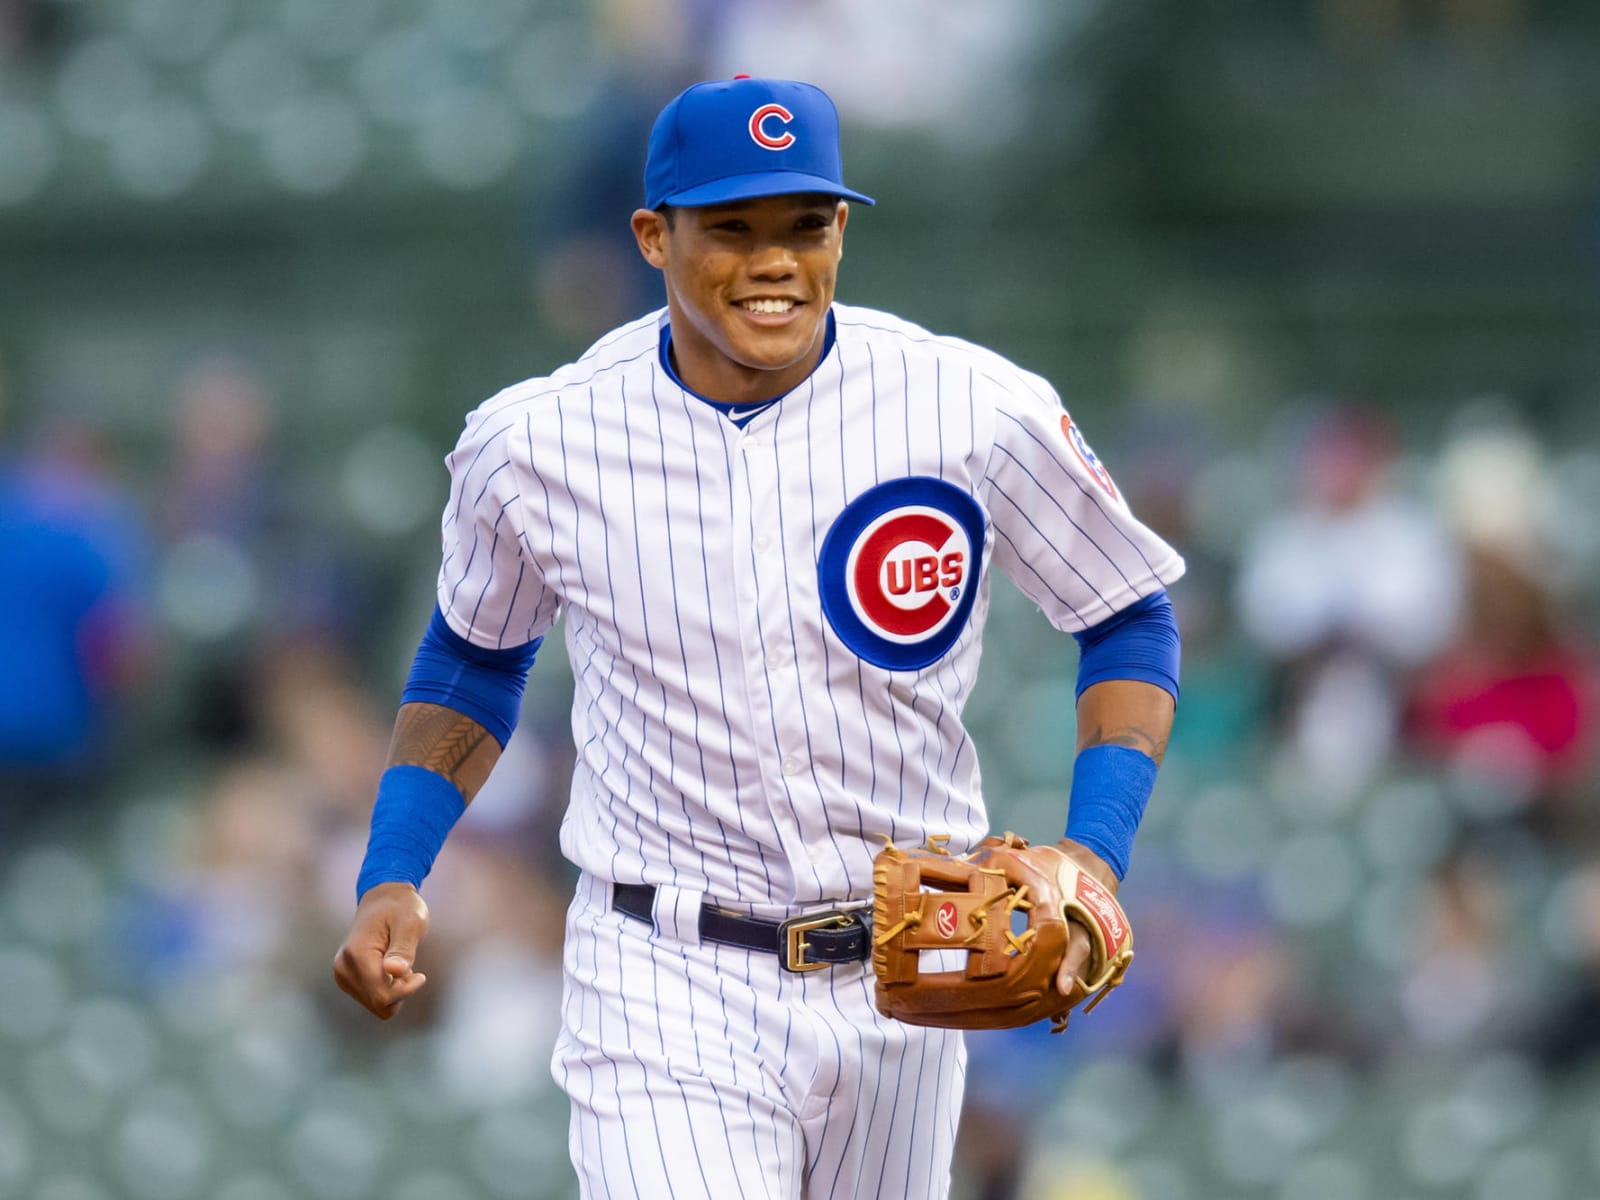 KBO's Heroes not bringing back ex-MLB player Addison Russell